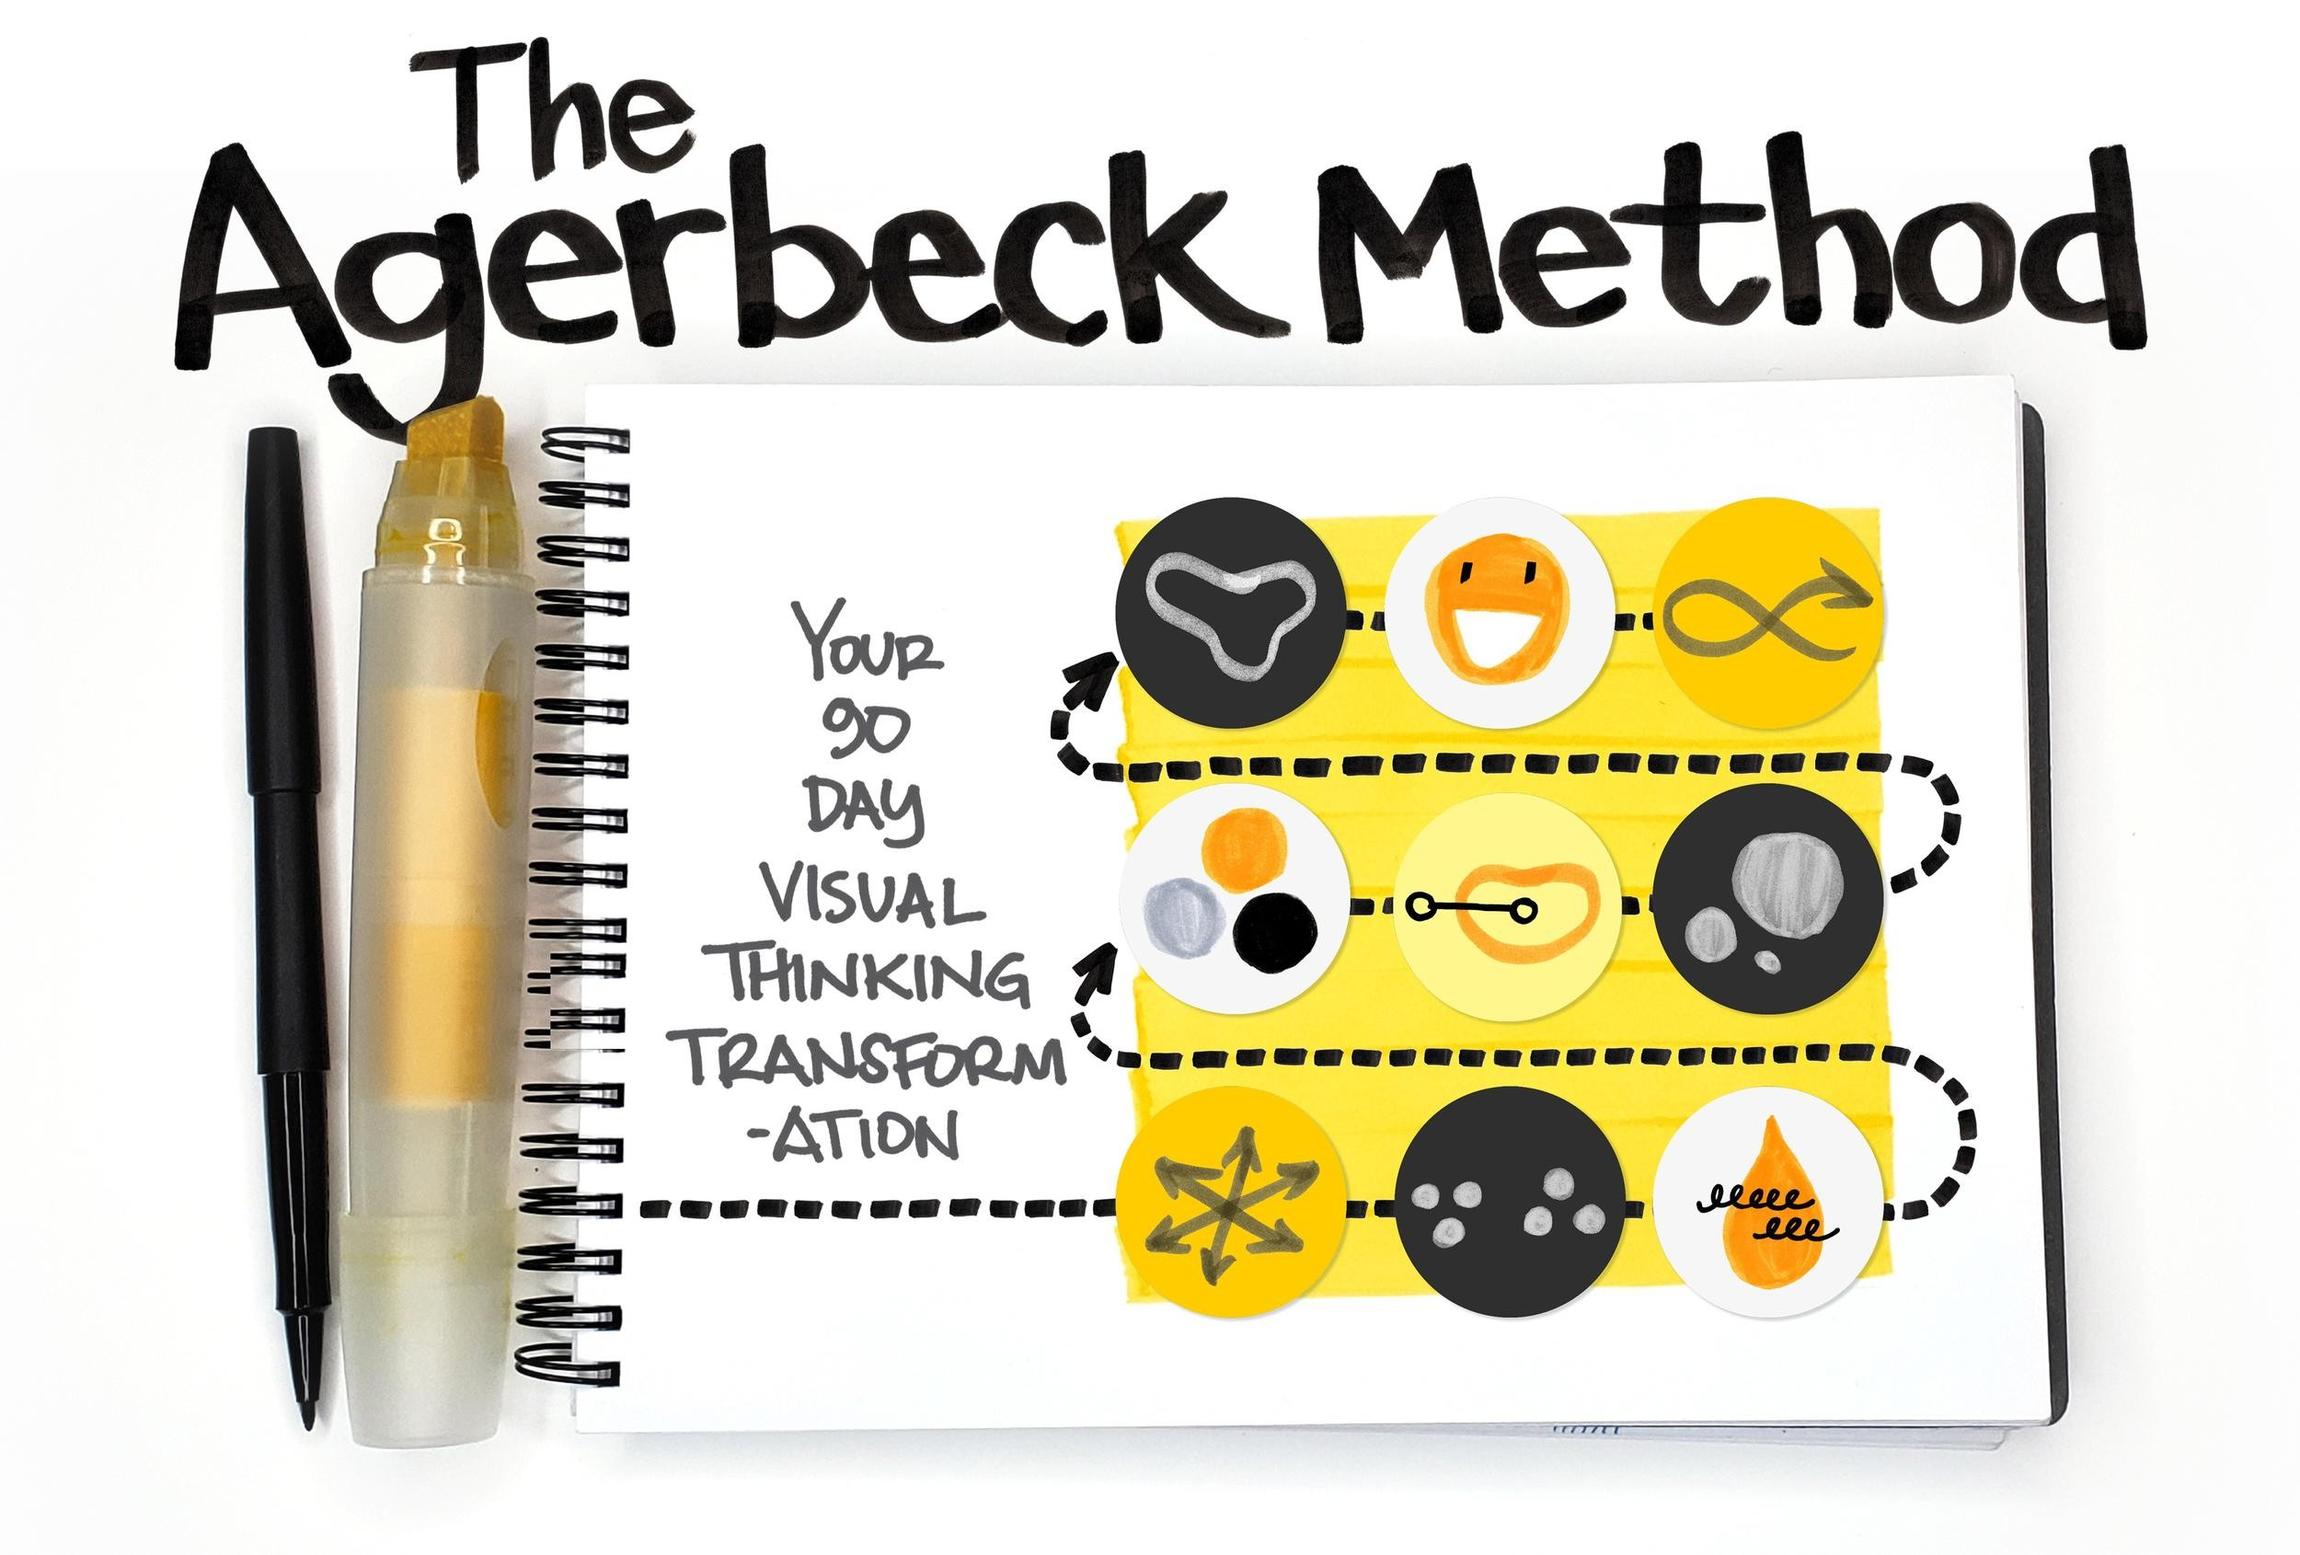 The Agerbeck Method